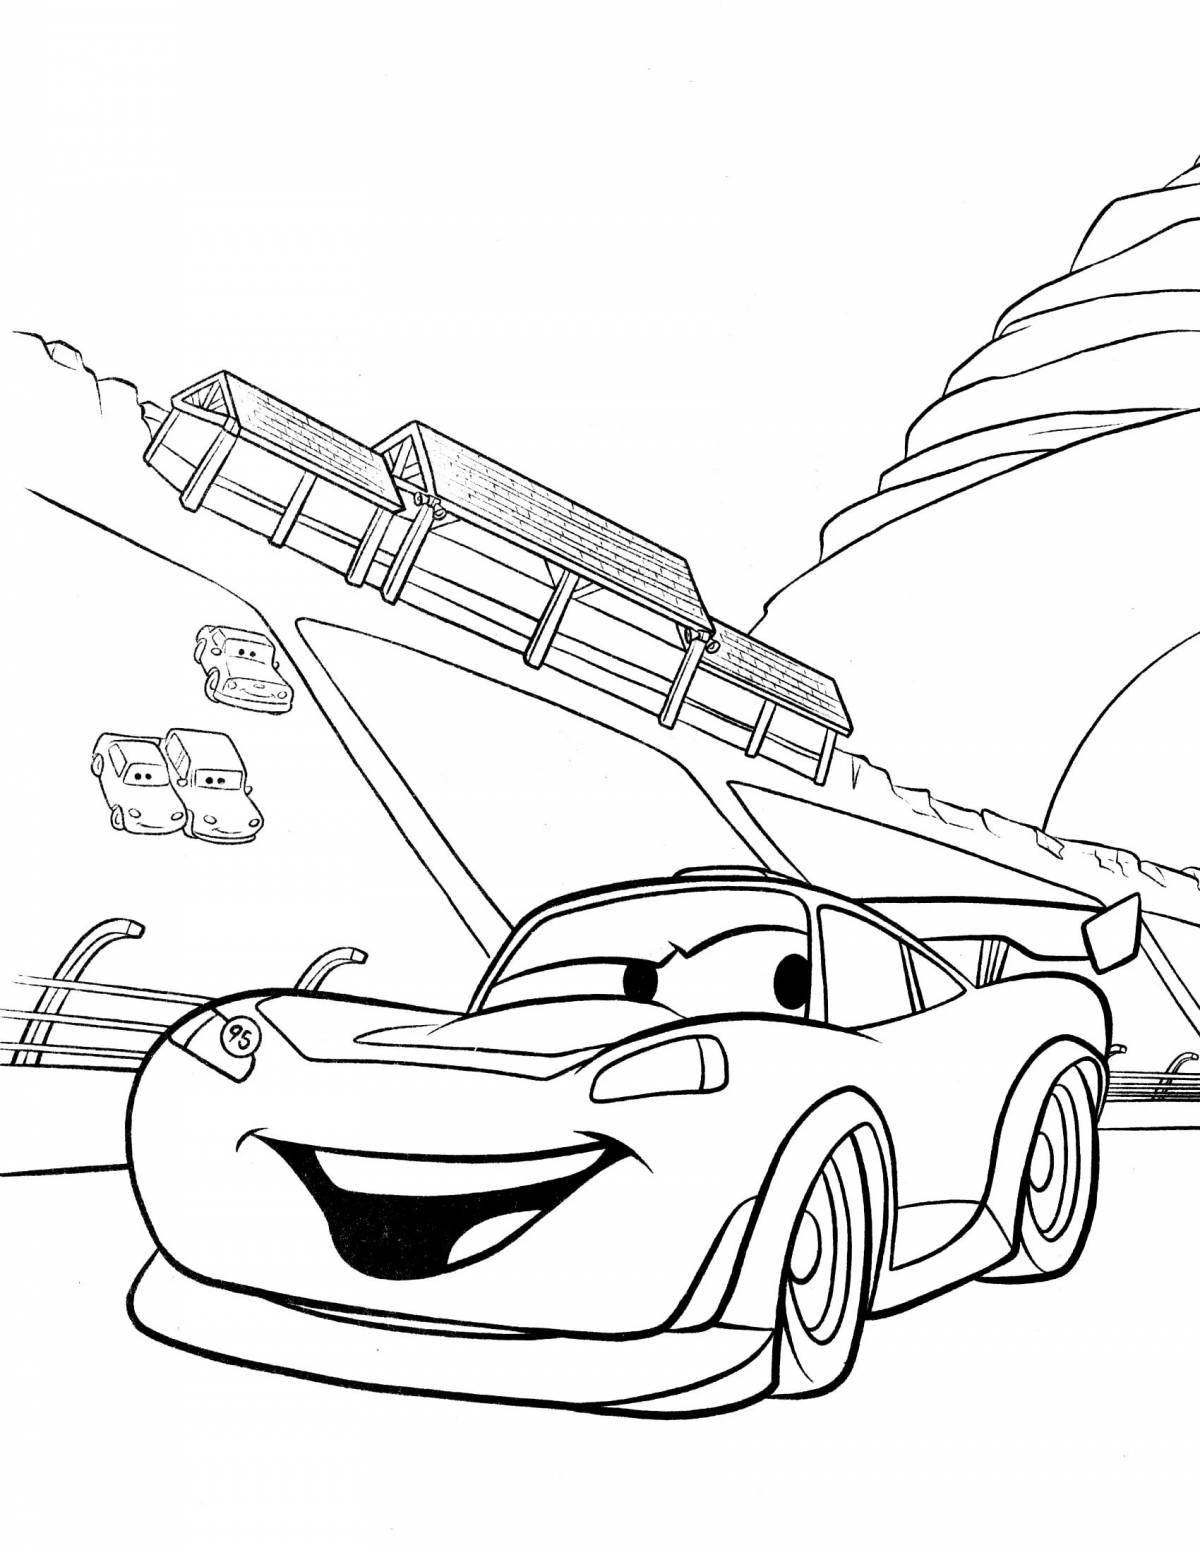 Great fast cars coloring book